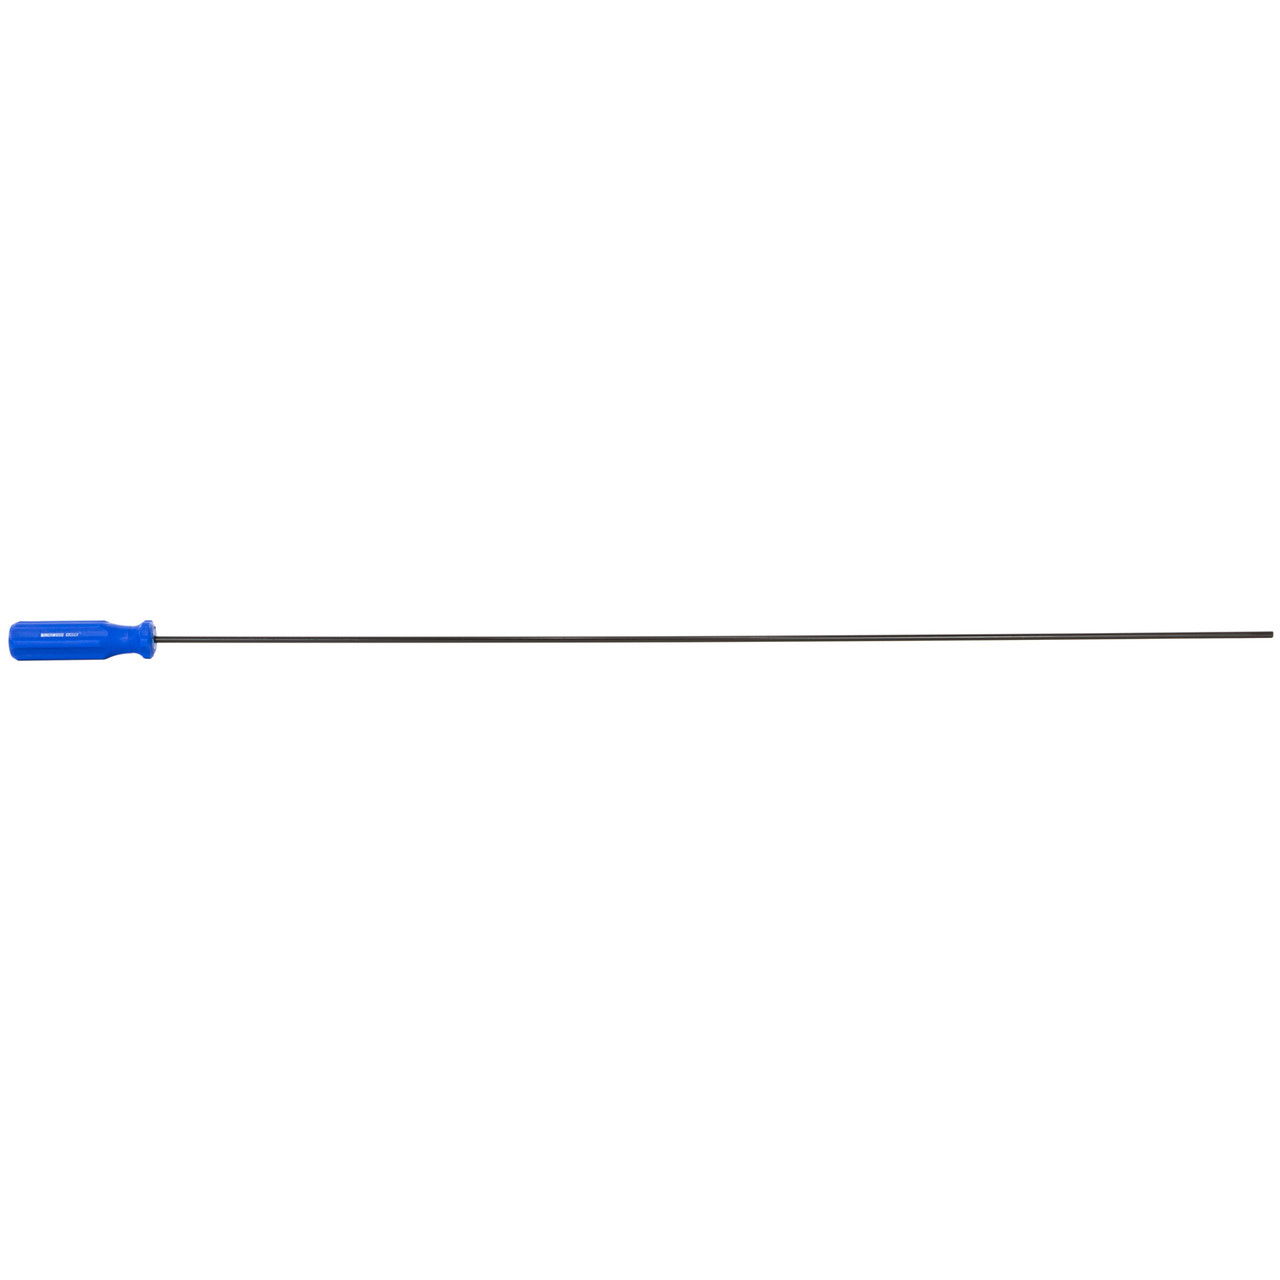 Birchwood Casey BC-41405 Coated Cleaning Rod 33" 20/26cal